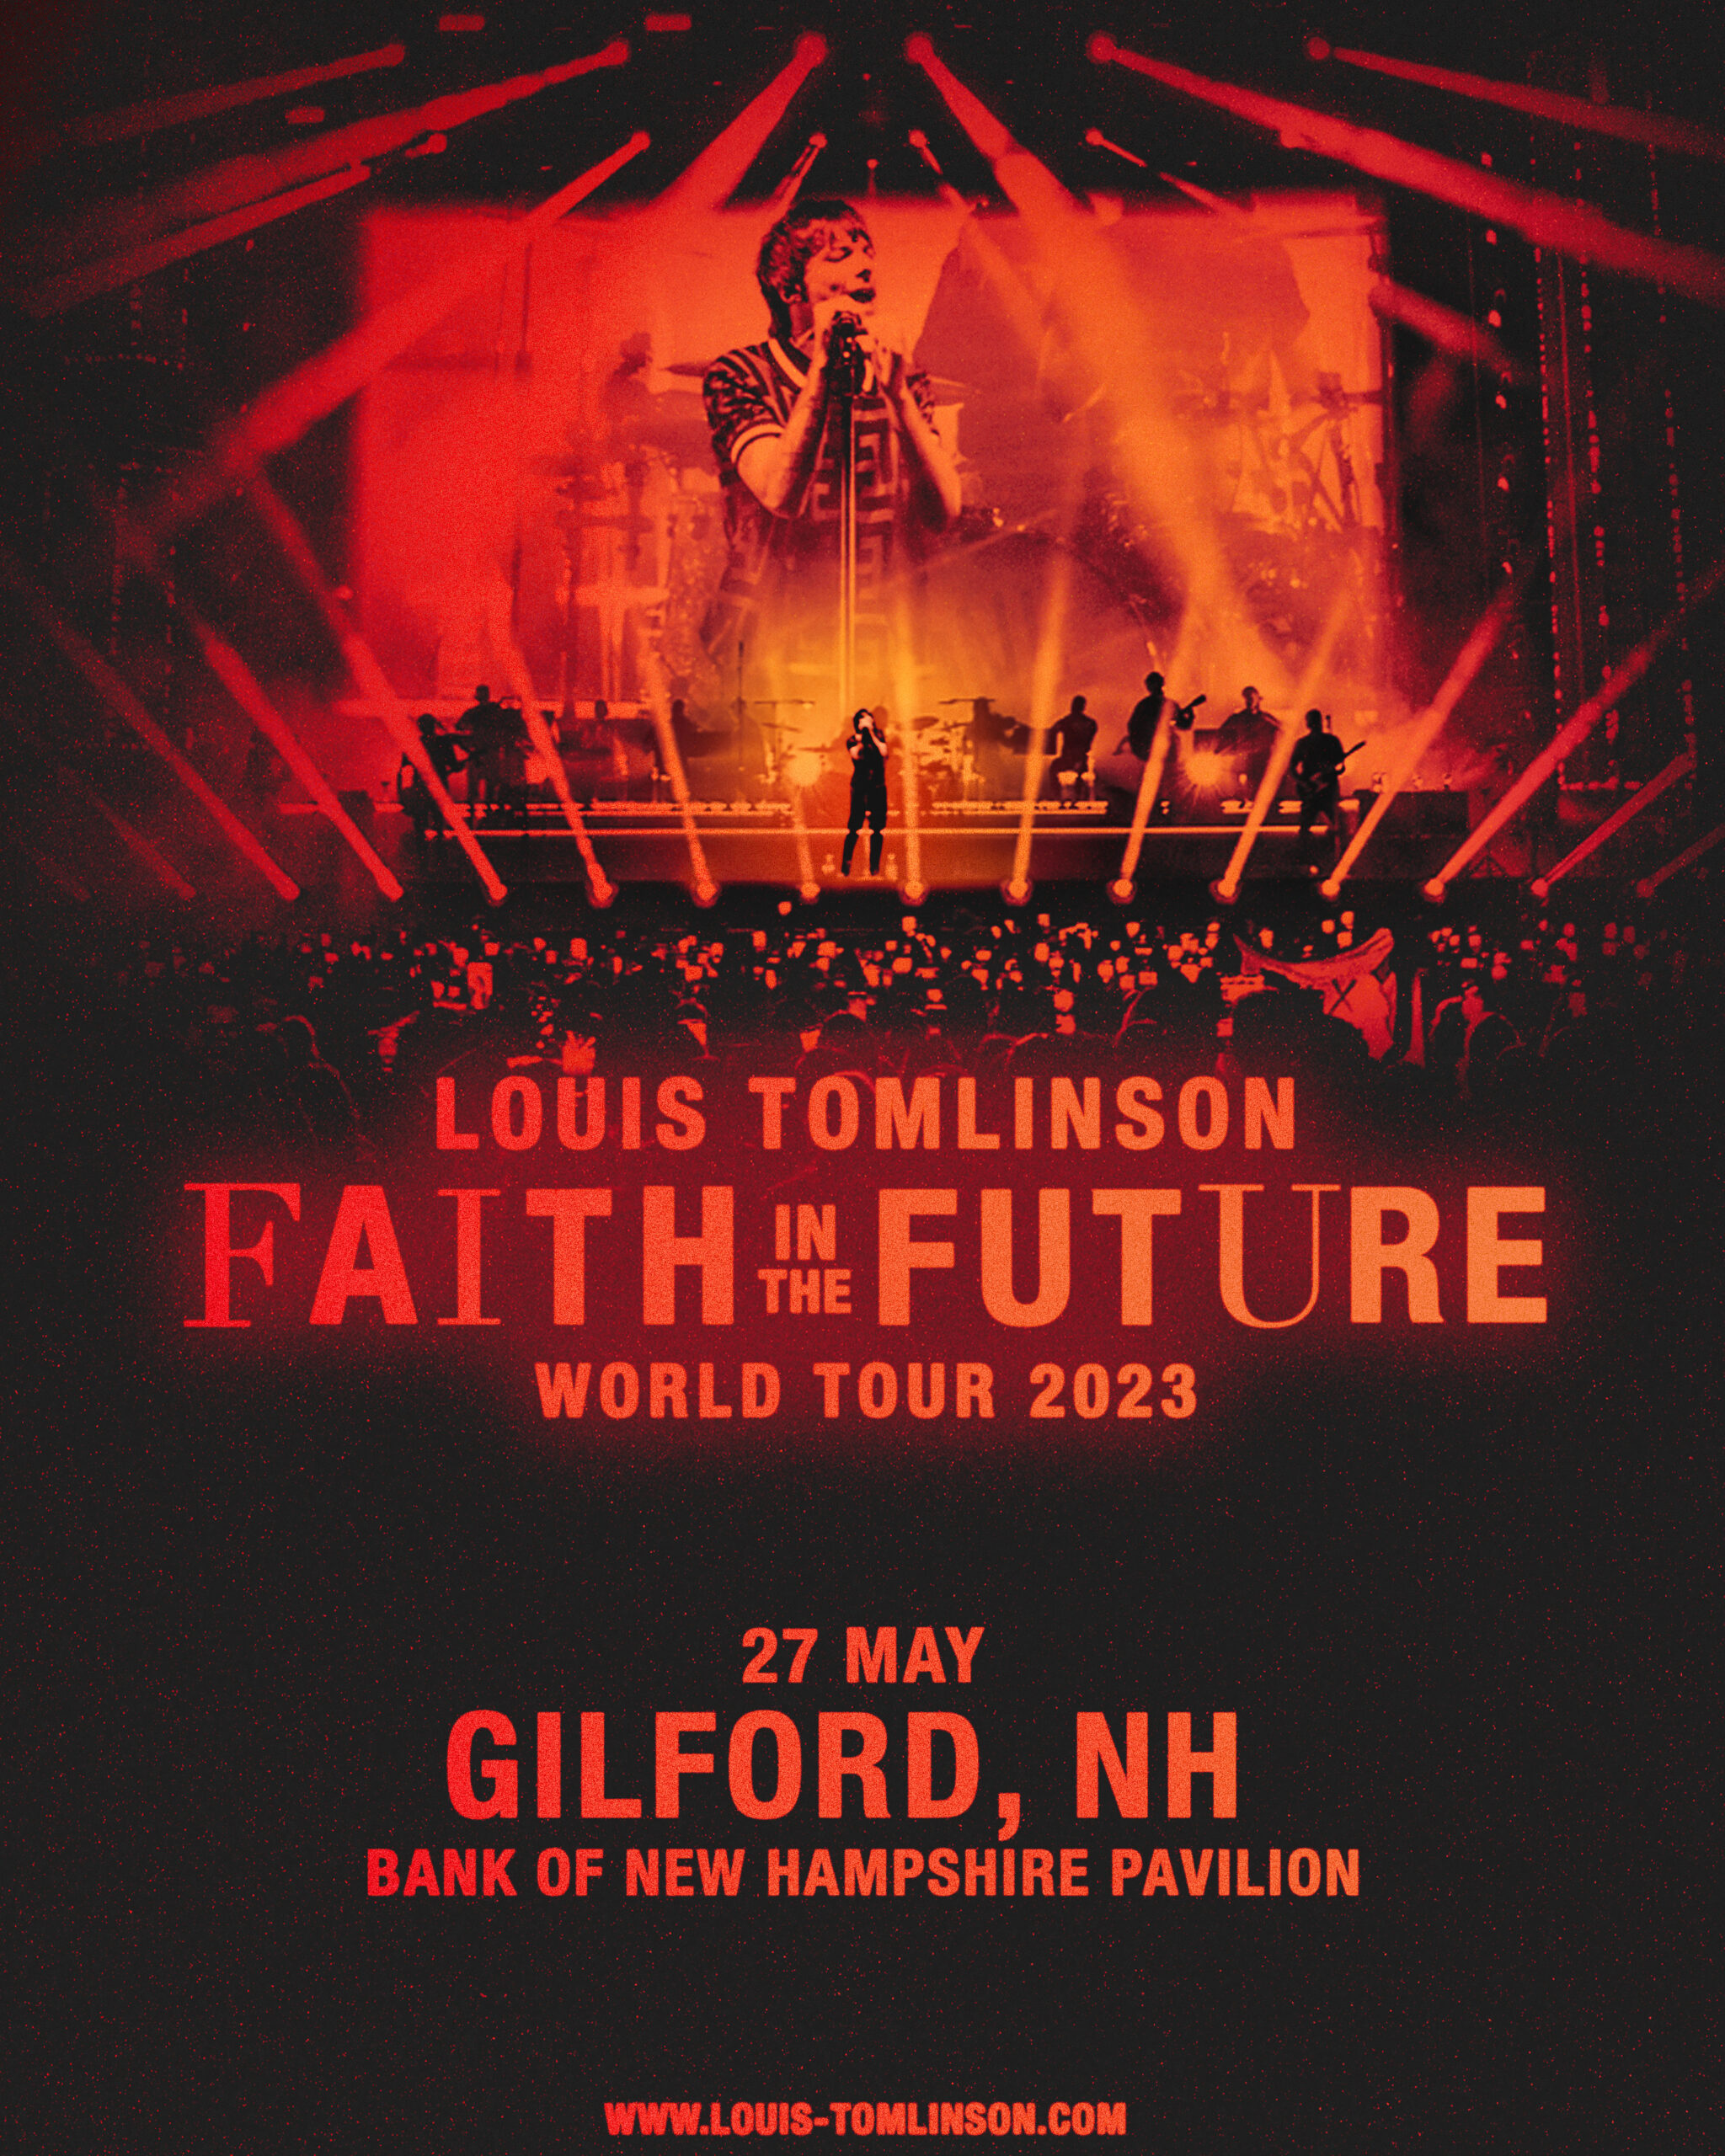 LAST CHANCE To Win Tickets To Louis Tomlinson At BNHP!